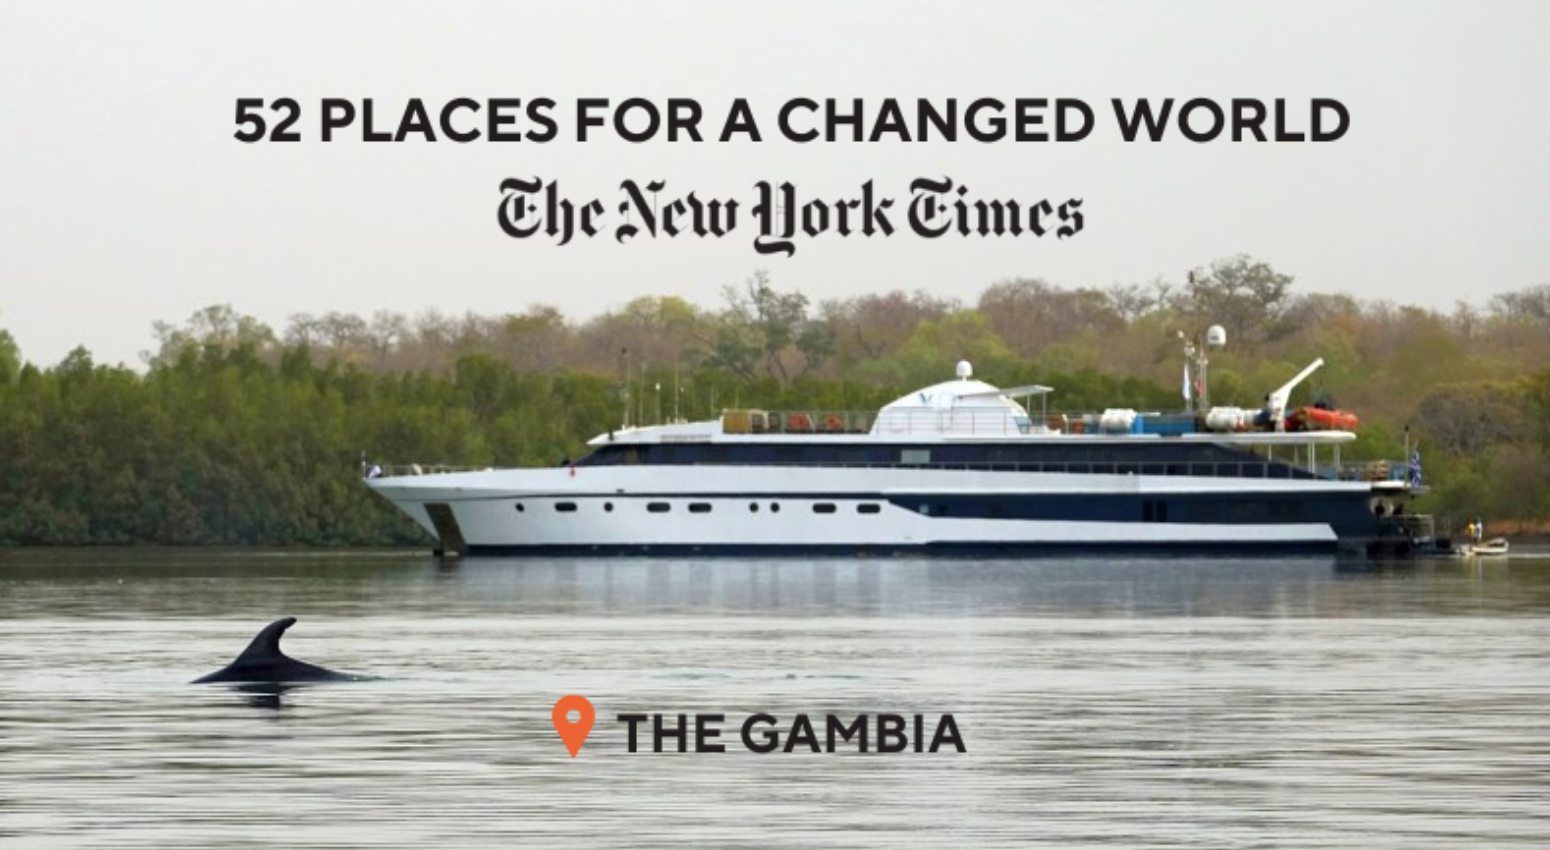 A sharp in the water with a Variety Cruises' ship in the background in Gambia, one of the 52 places for a changed world according to New York Times